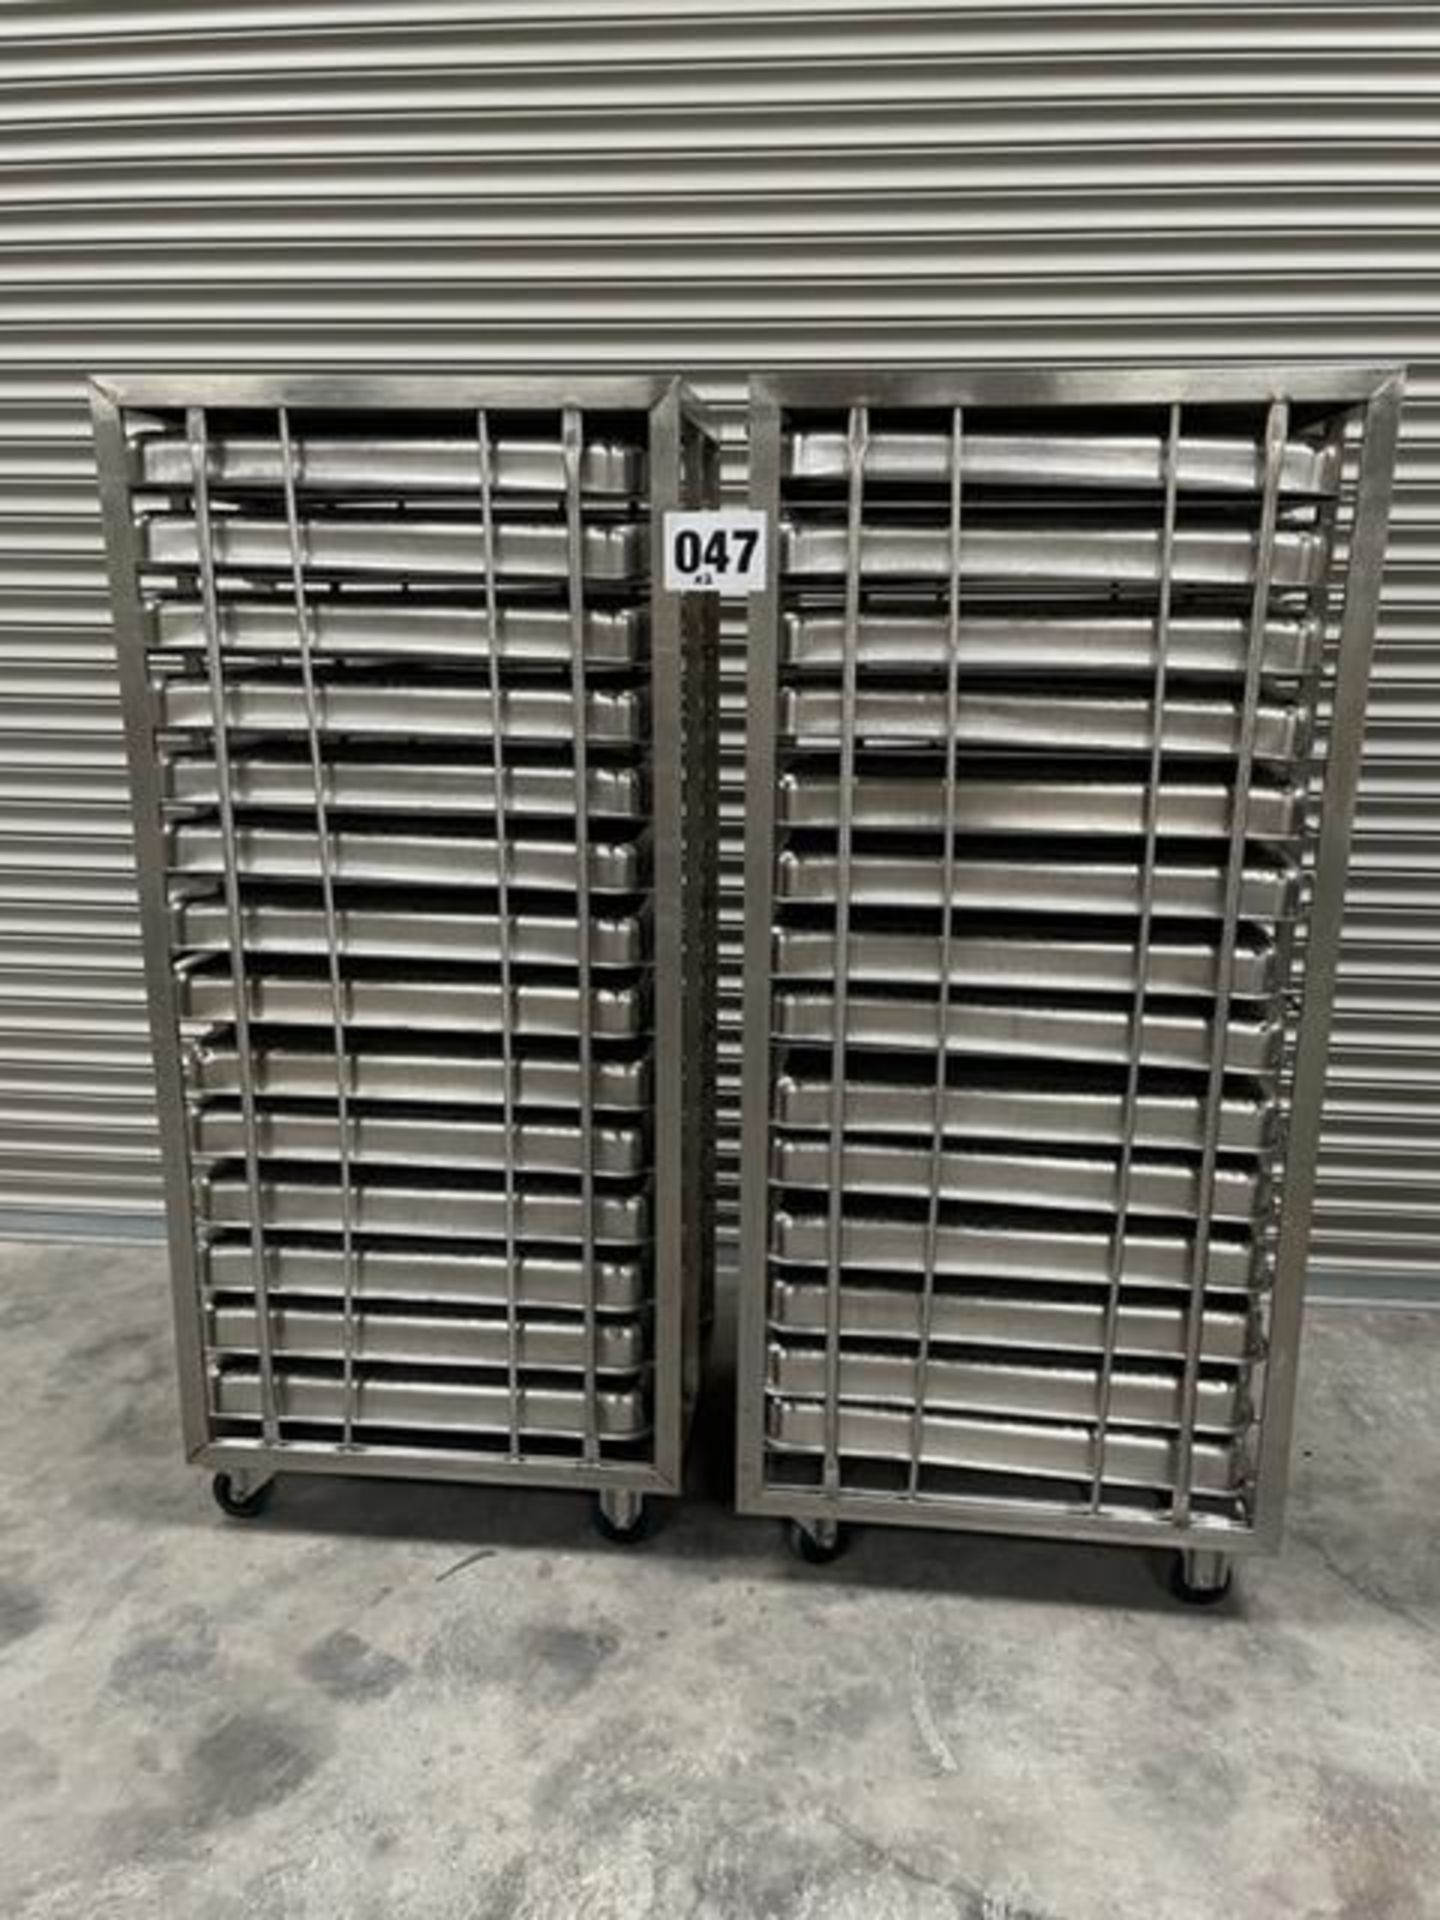 2 X UNITECH S/S RACKS COMPLETE WITH 14 GASTRO TRAYS IN EACH RACK.